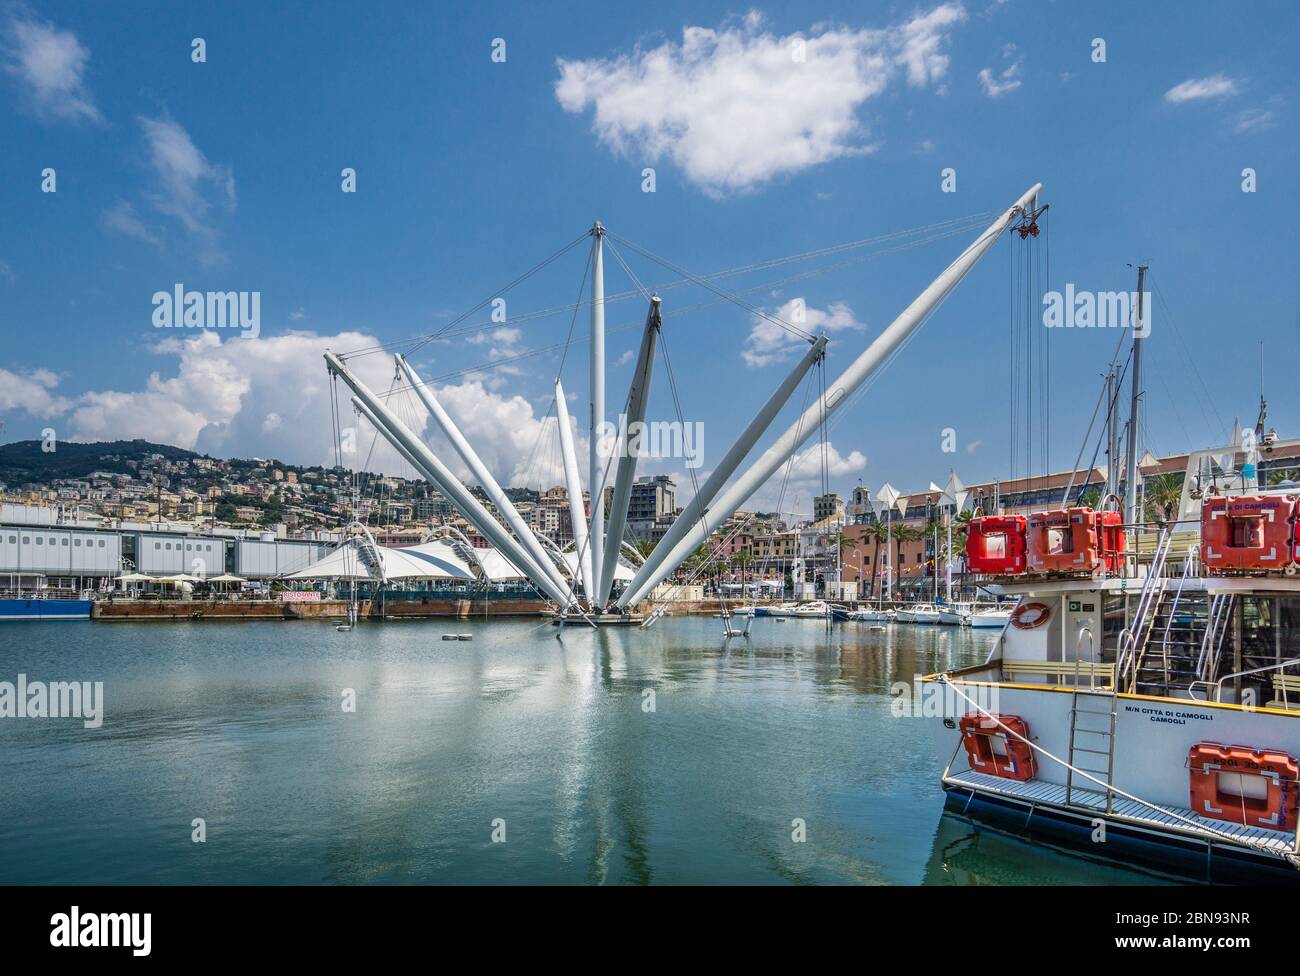 view of Bigo, a Sculptural, crane-inspired lift offering short rides with panoramic harbor views in the Old Harbour of Geno, Liguria, Italy Stock Photo